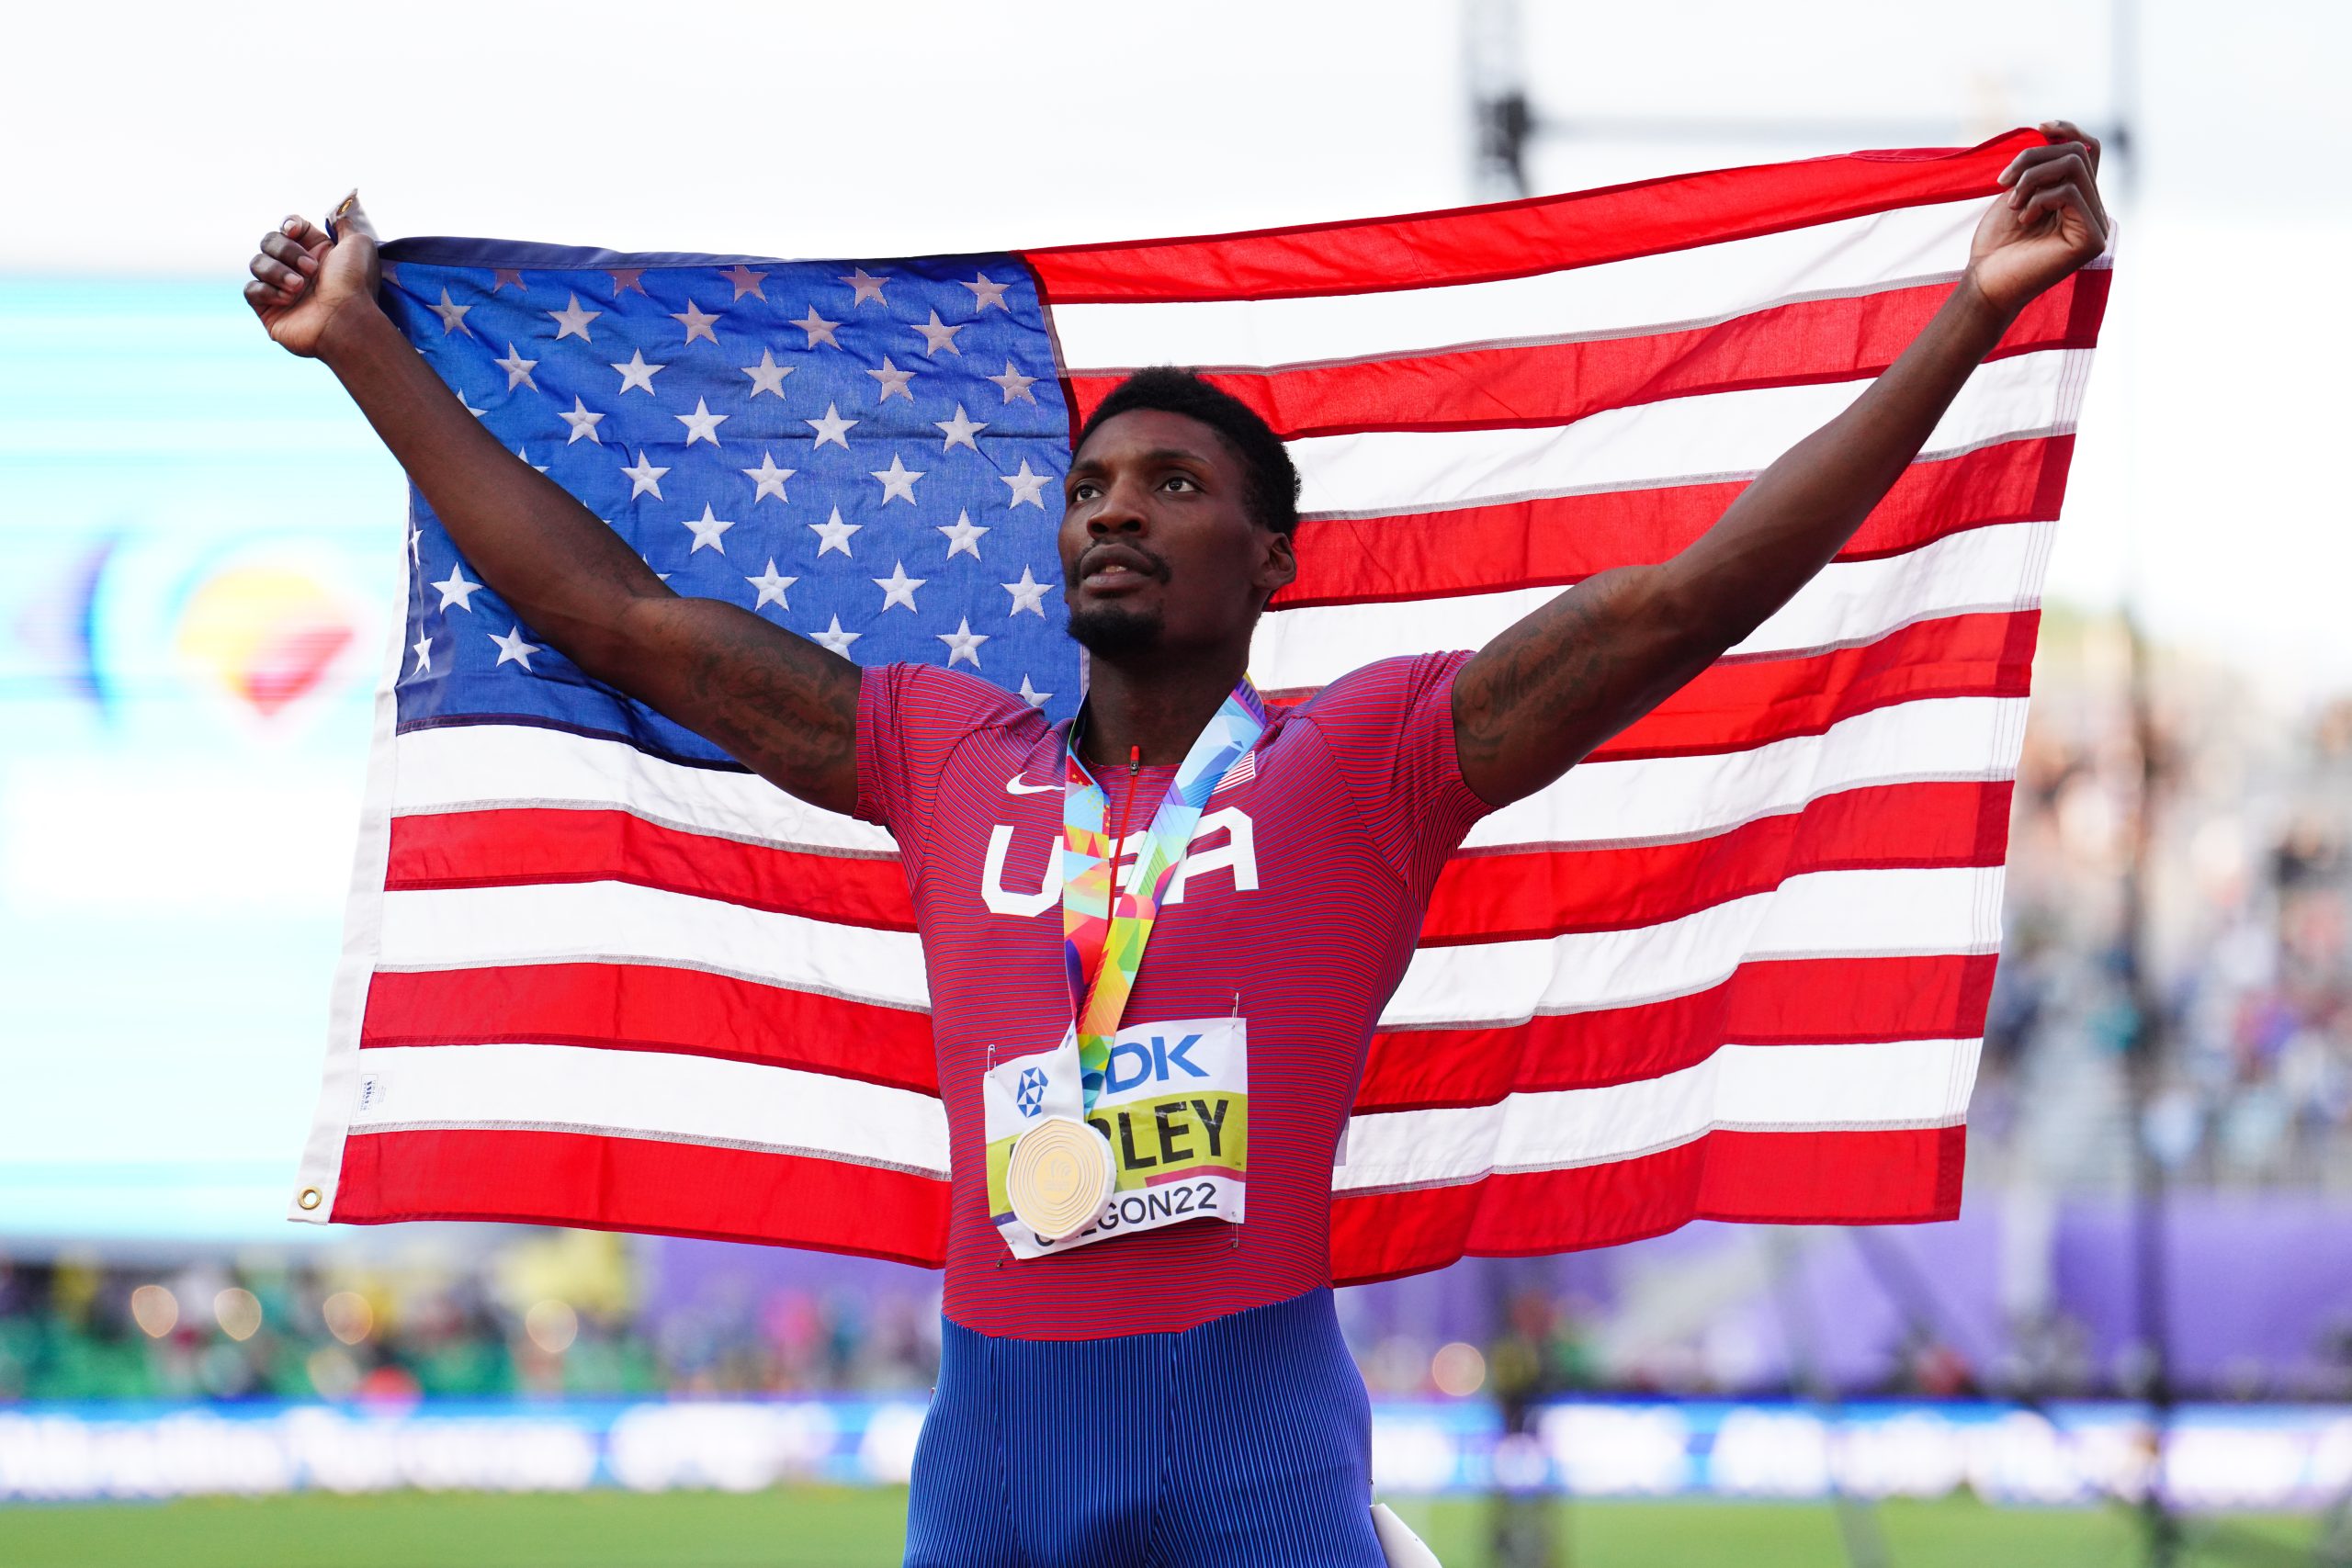 Fred Kerley says USA is chasing global domination as he wins 100m in Oregon